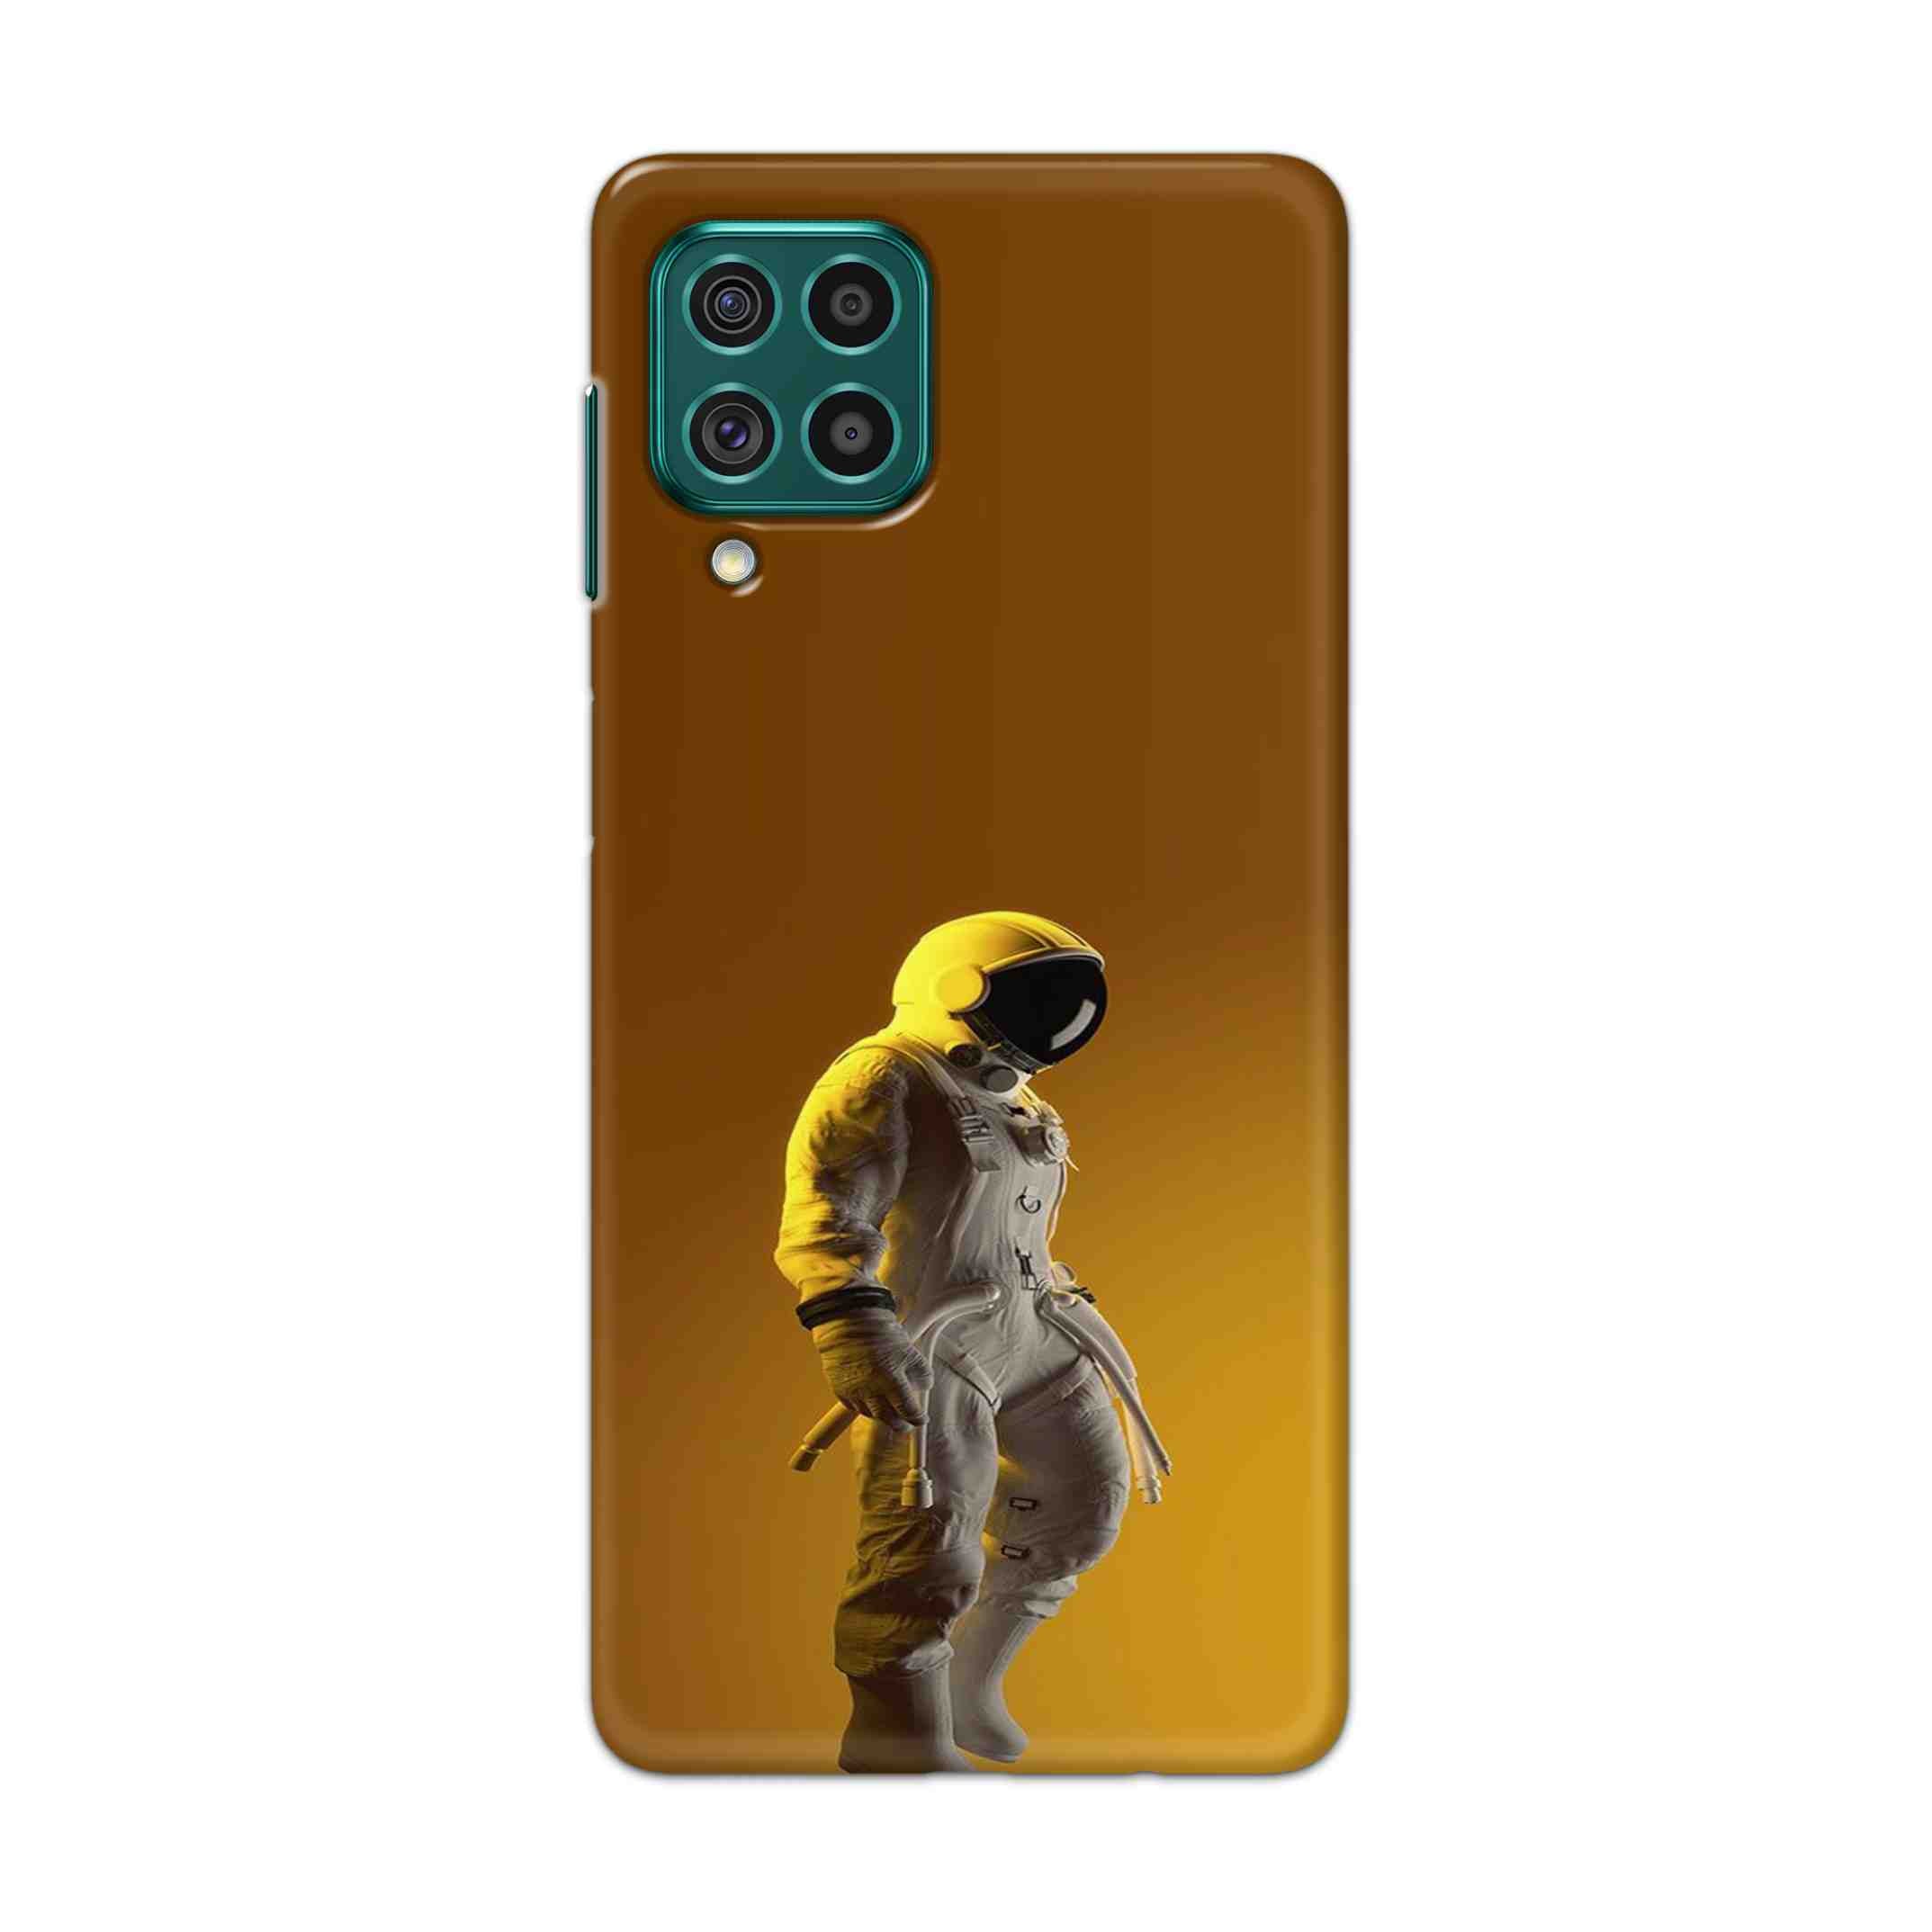 Buy Yellow Astronaut Hard Back Mobile Phone Case Cover For Galaxy F62 Online